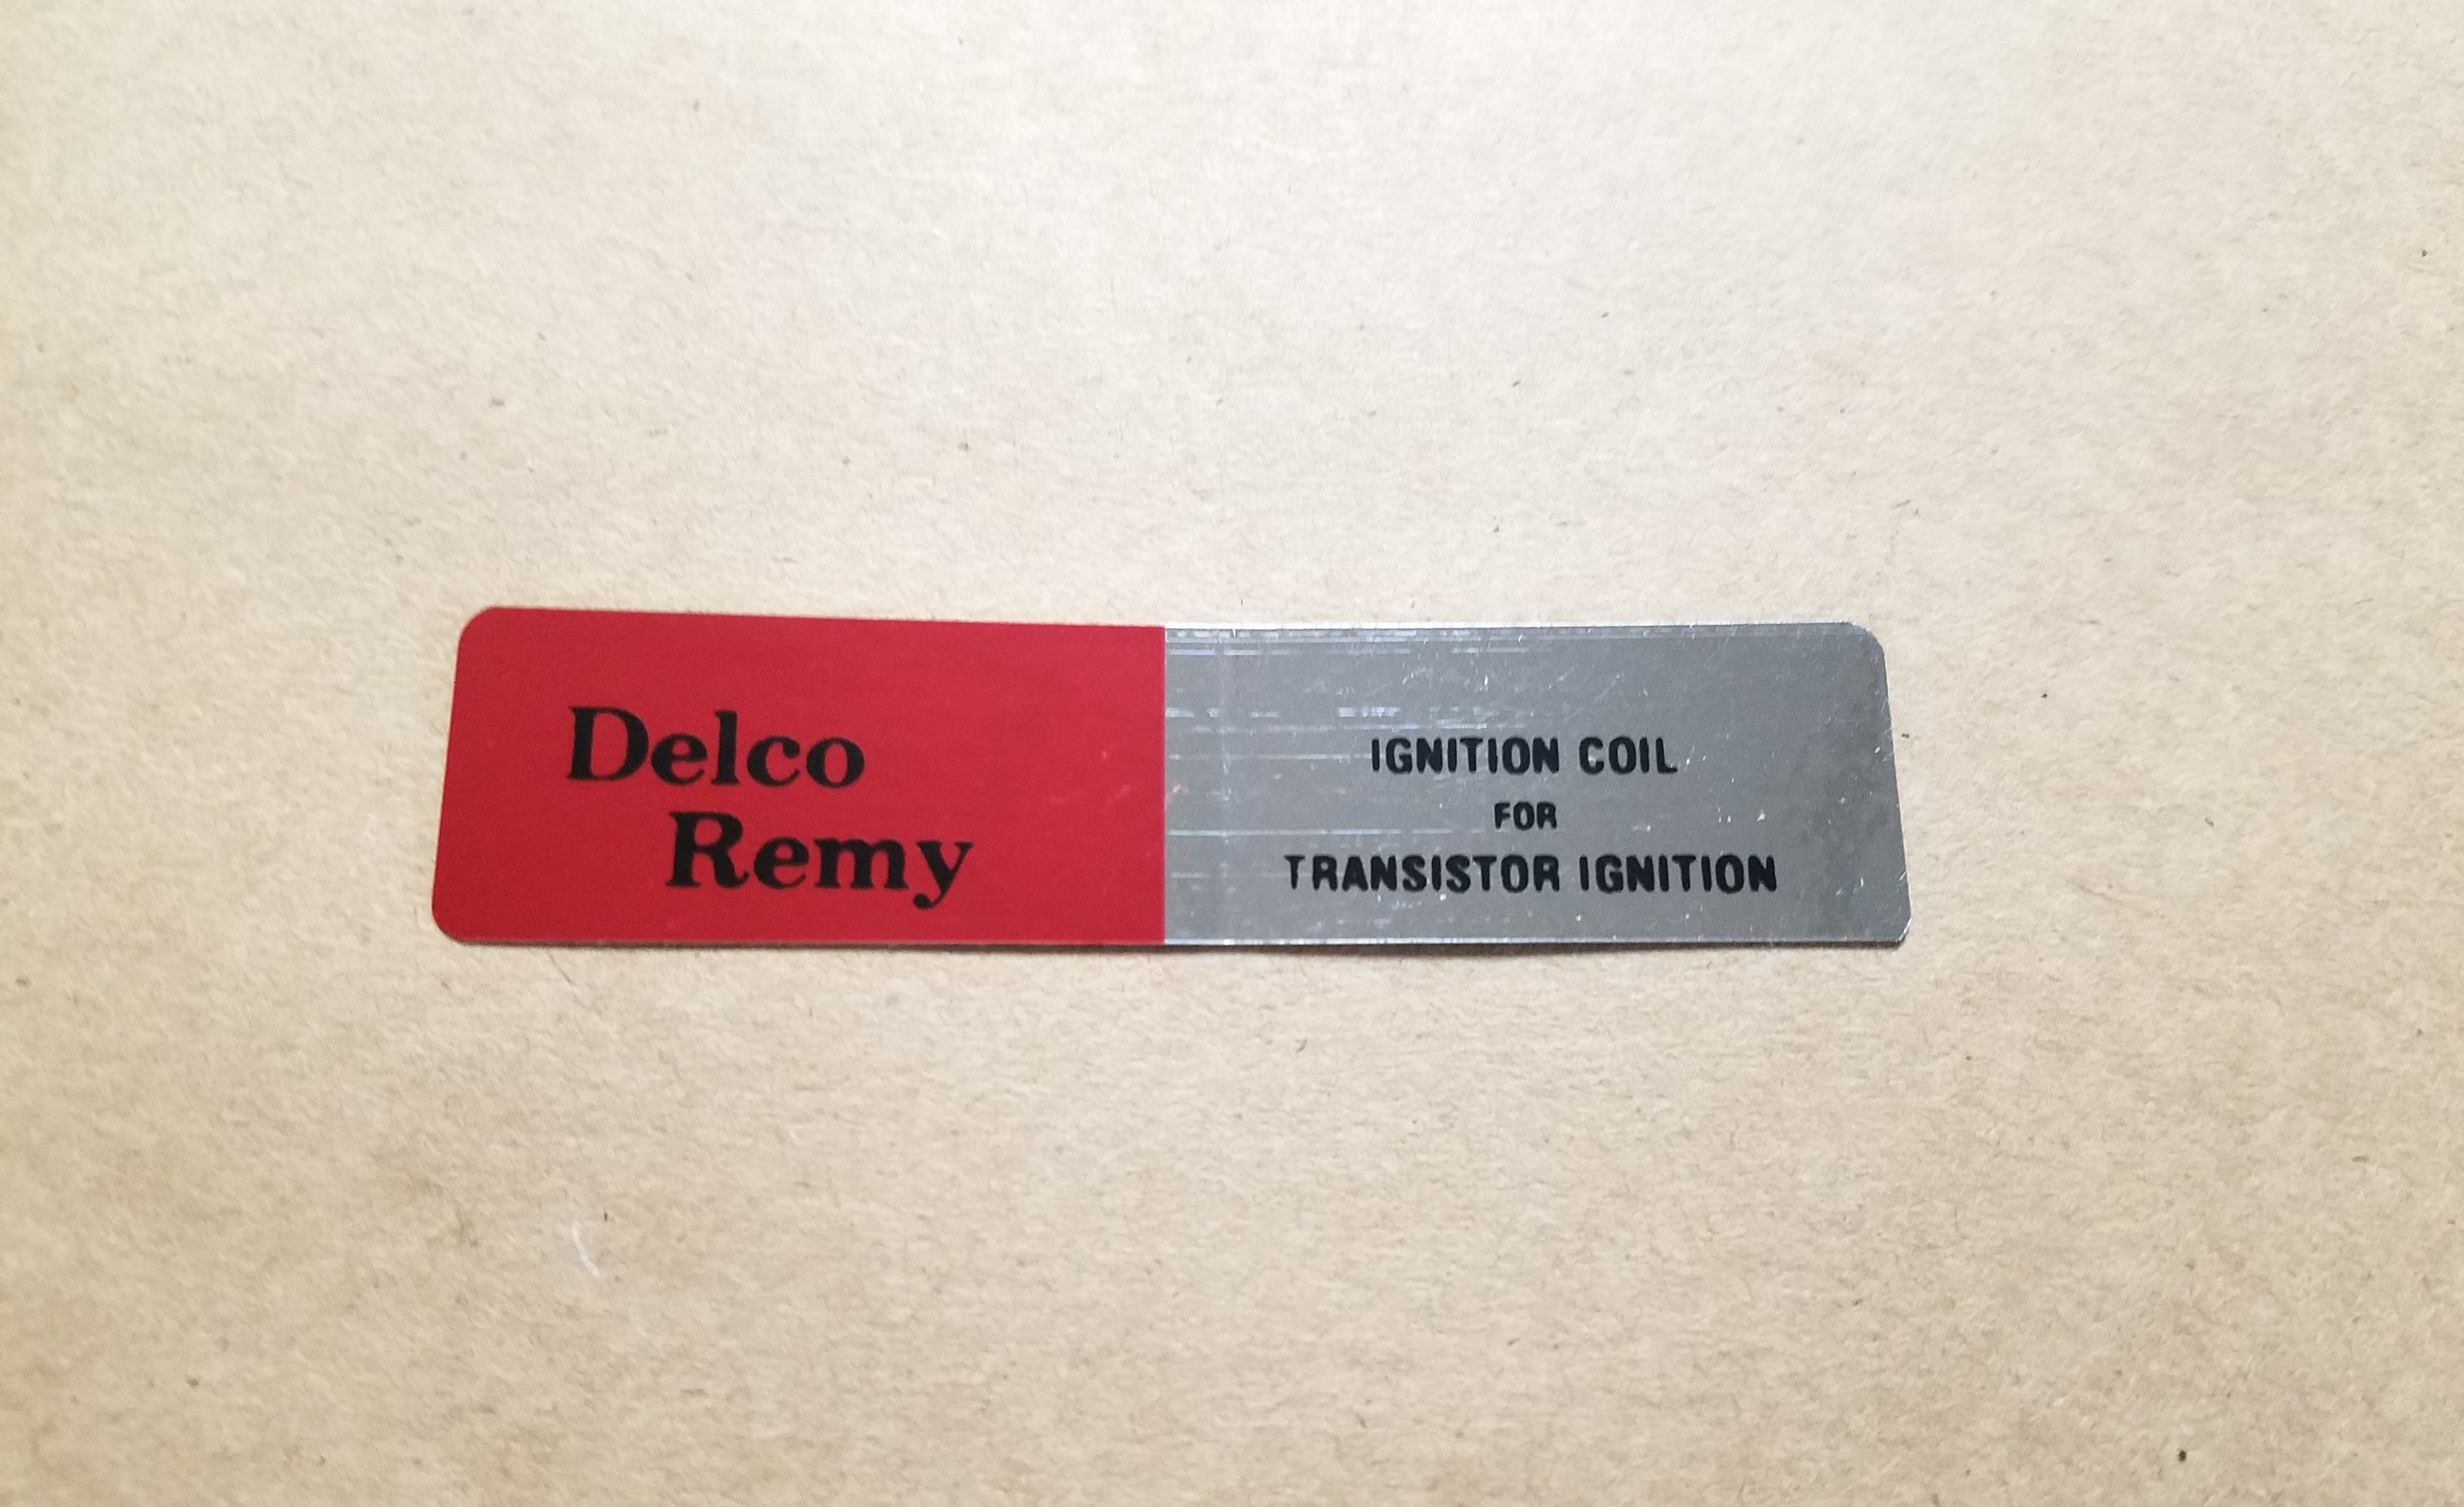 1963 Transistor Ignition Coil decal